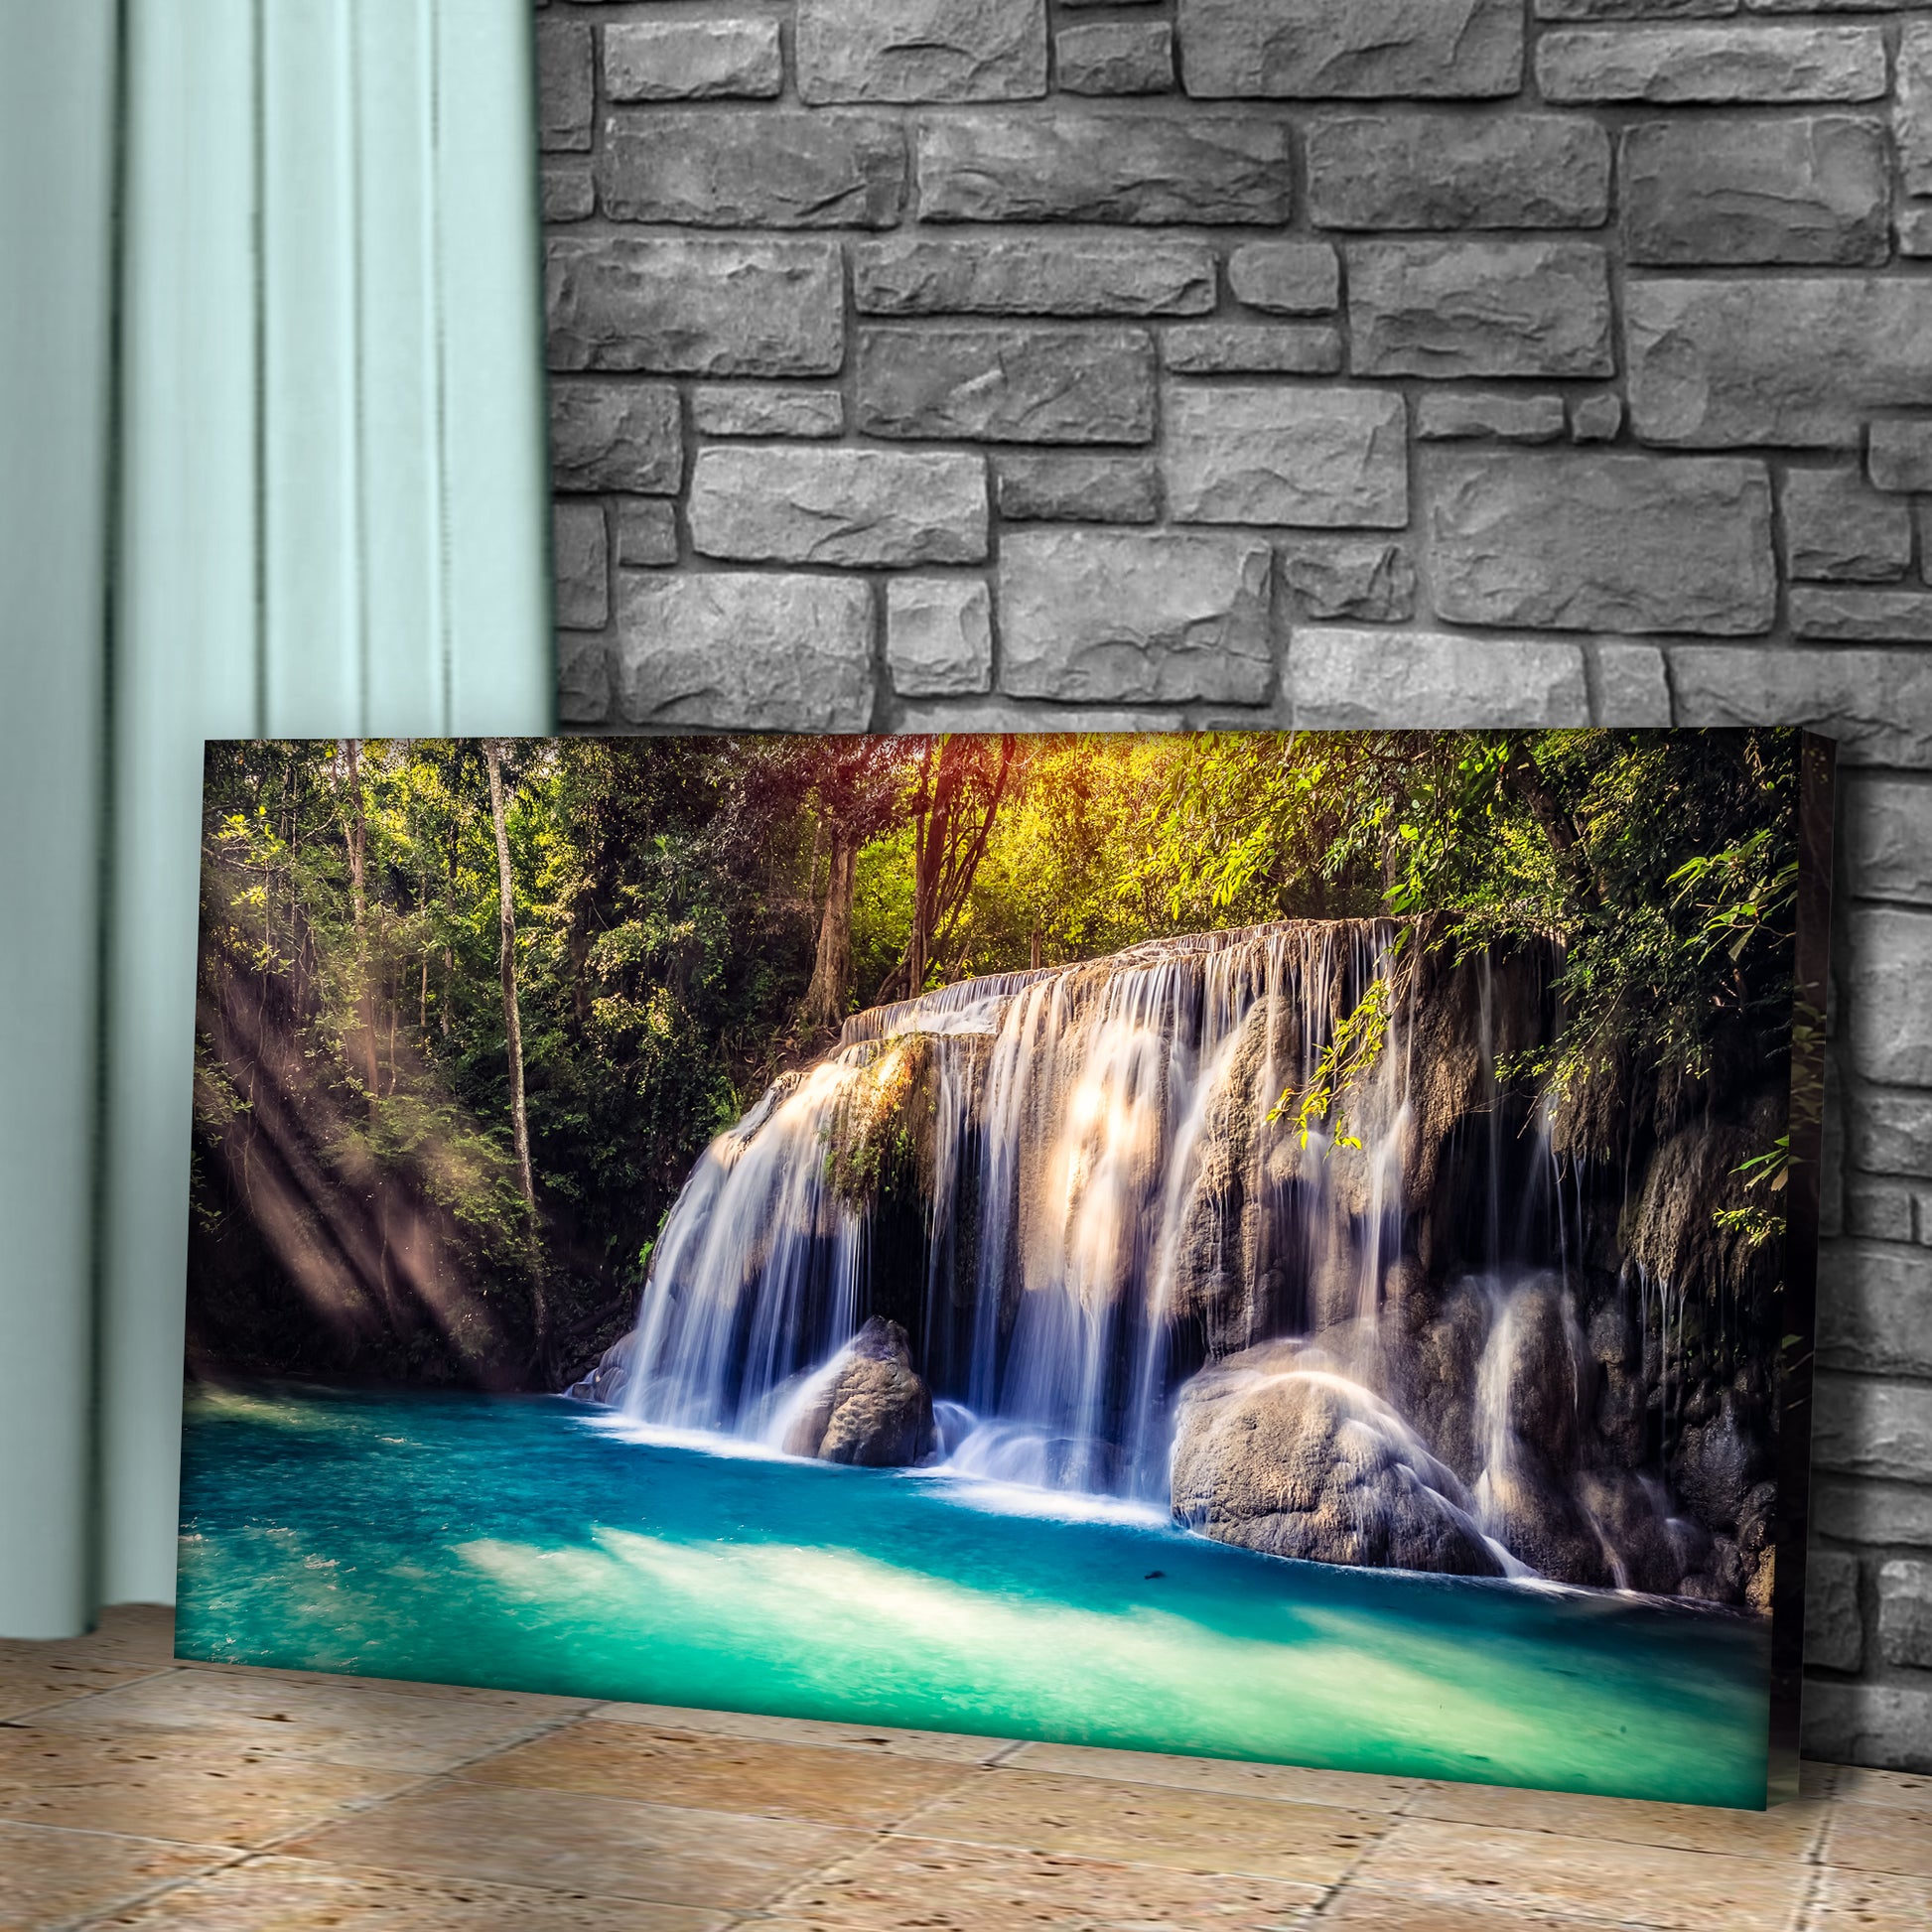 Rainforest Waterfall Canvas Wall Art Style 1 - Image by Tailored Canvases